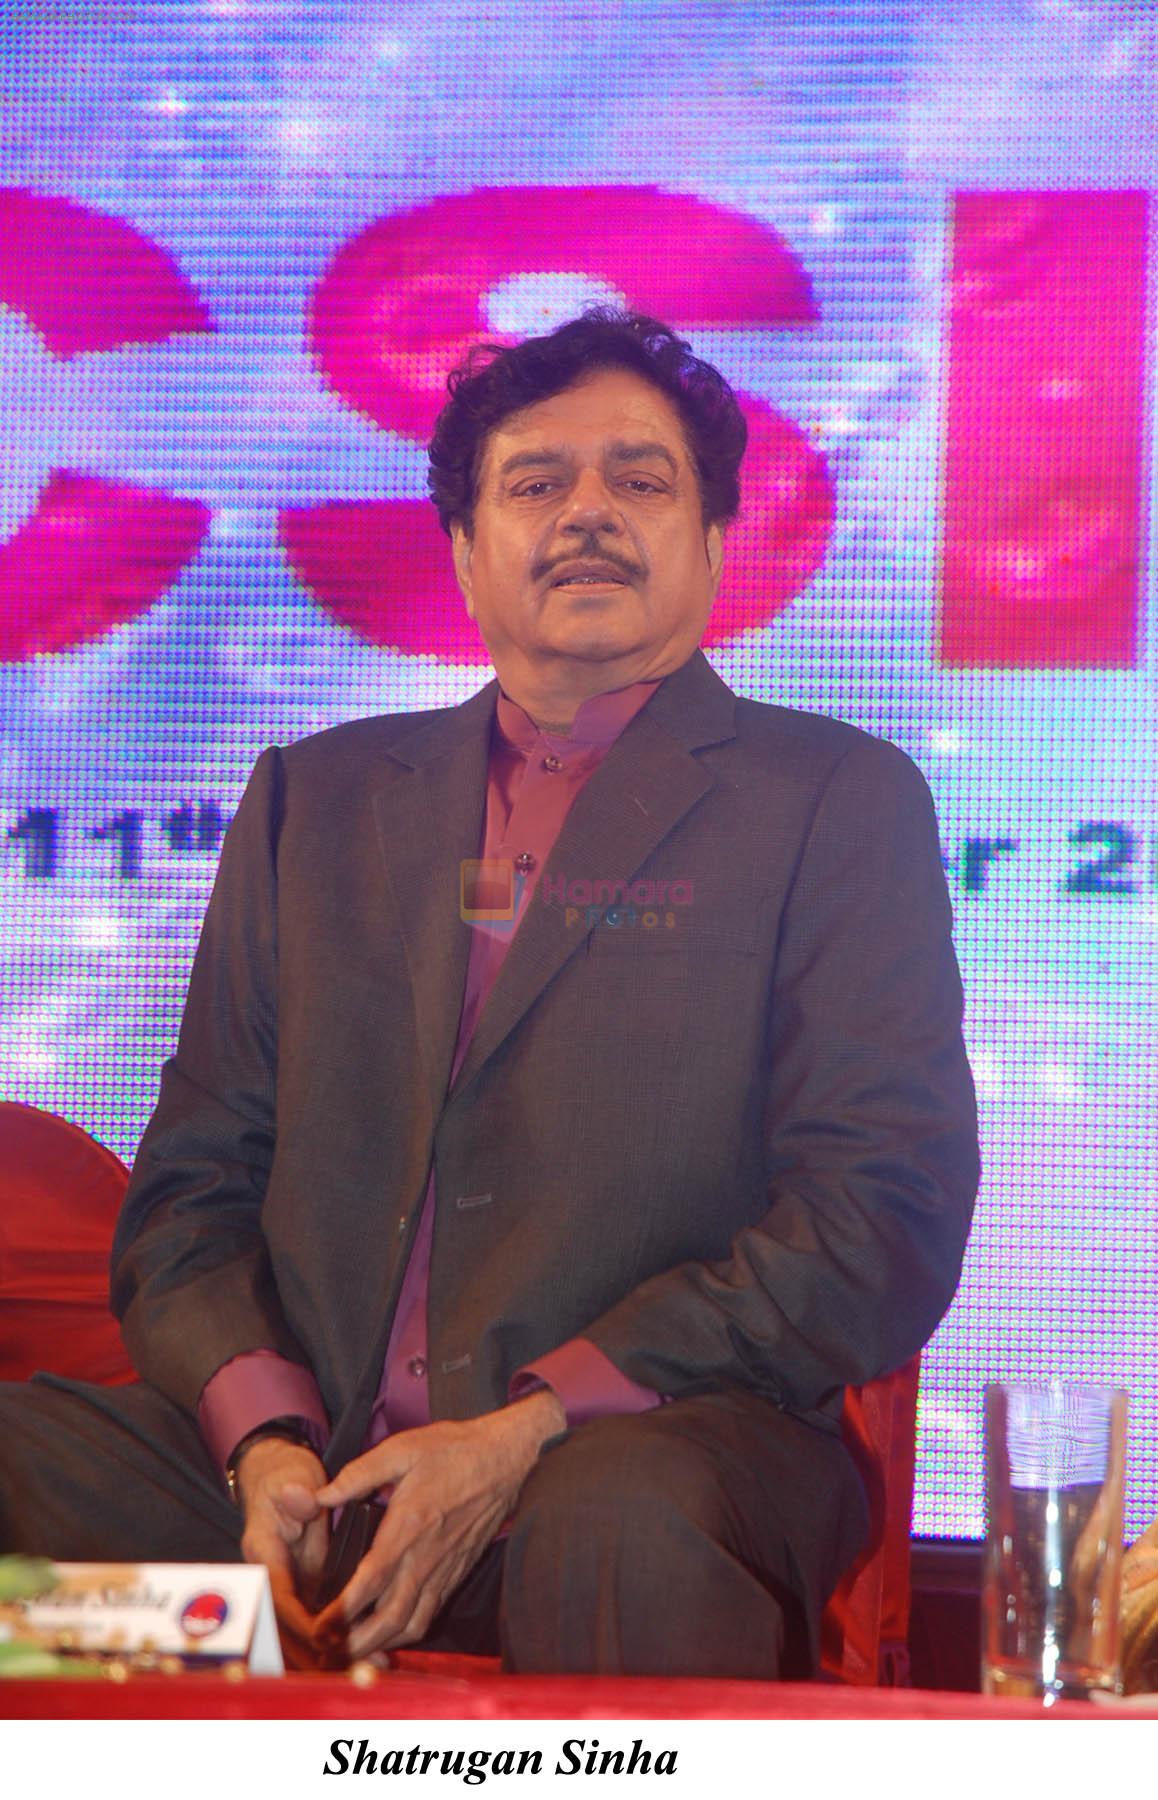 Shatrugan Sinha at the 63rd Annual Conference of Cardiological Society of India in NCPA complex, Mumbai on 9th Dec 2011